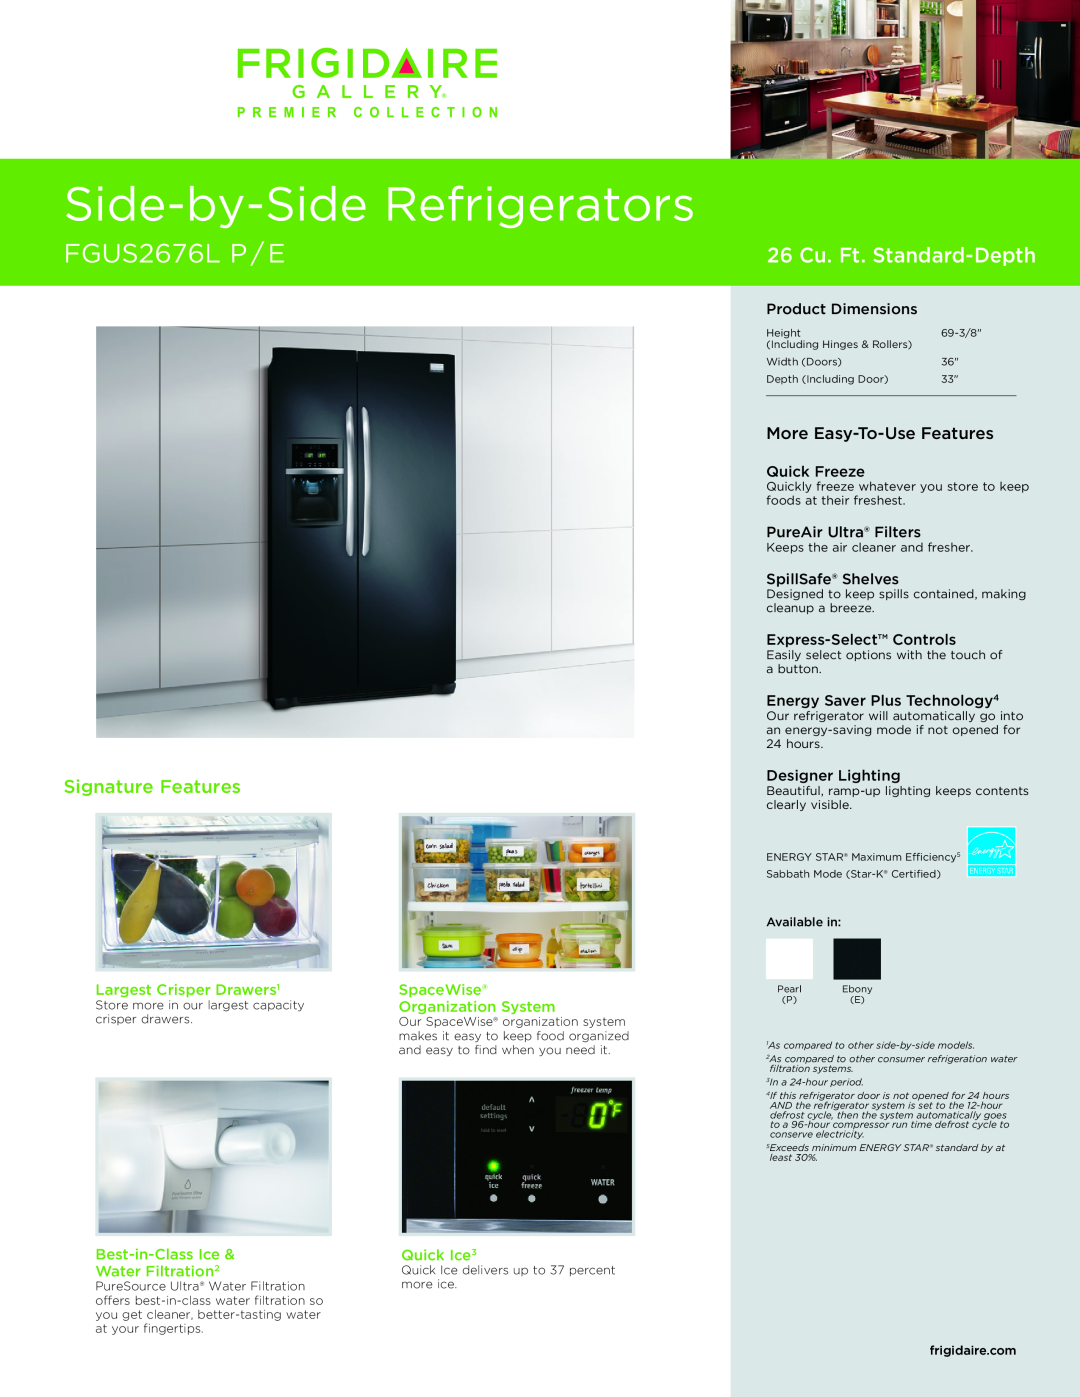 Frigidaire dimensions Side-by-SideRefrigerators, FGUS2676L P / E, 26 Cu. Ft. Standard-Depth, Signature Features 